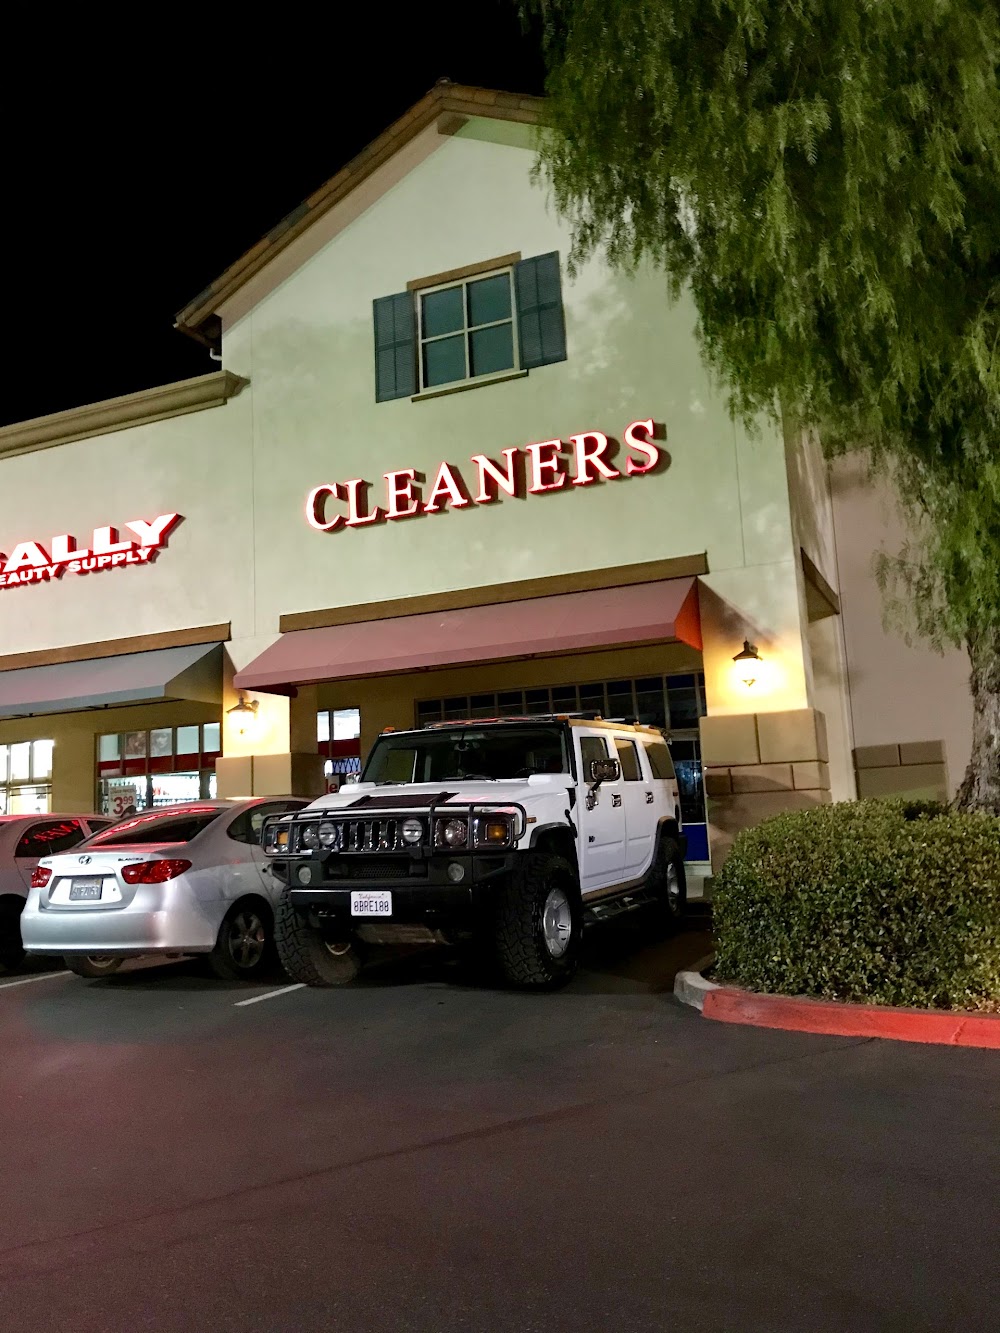 Marketplace Cleaners